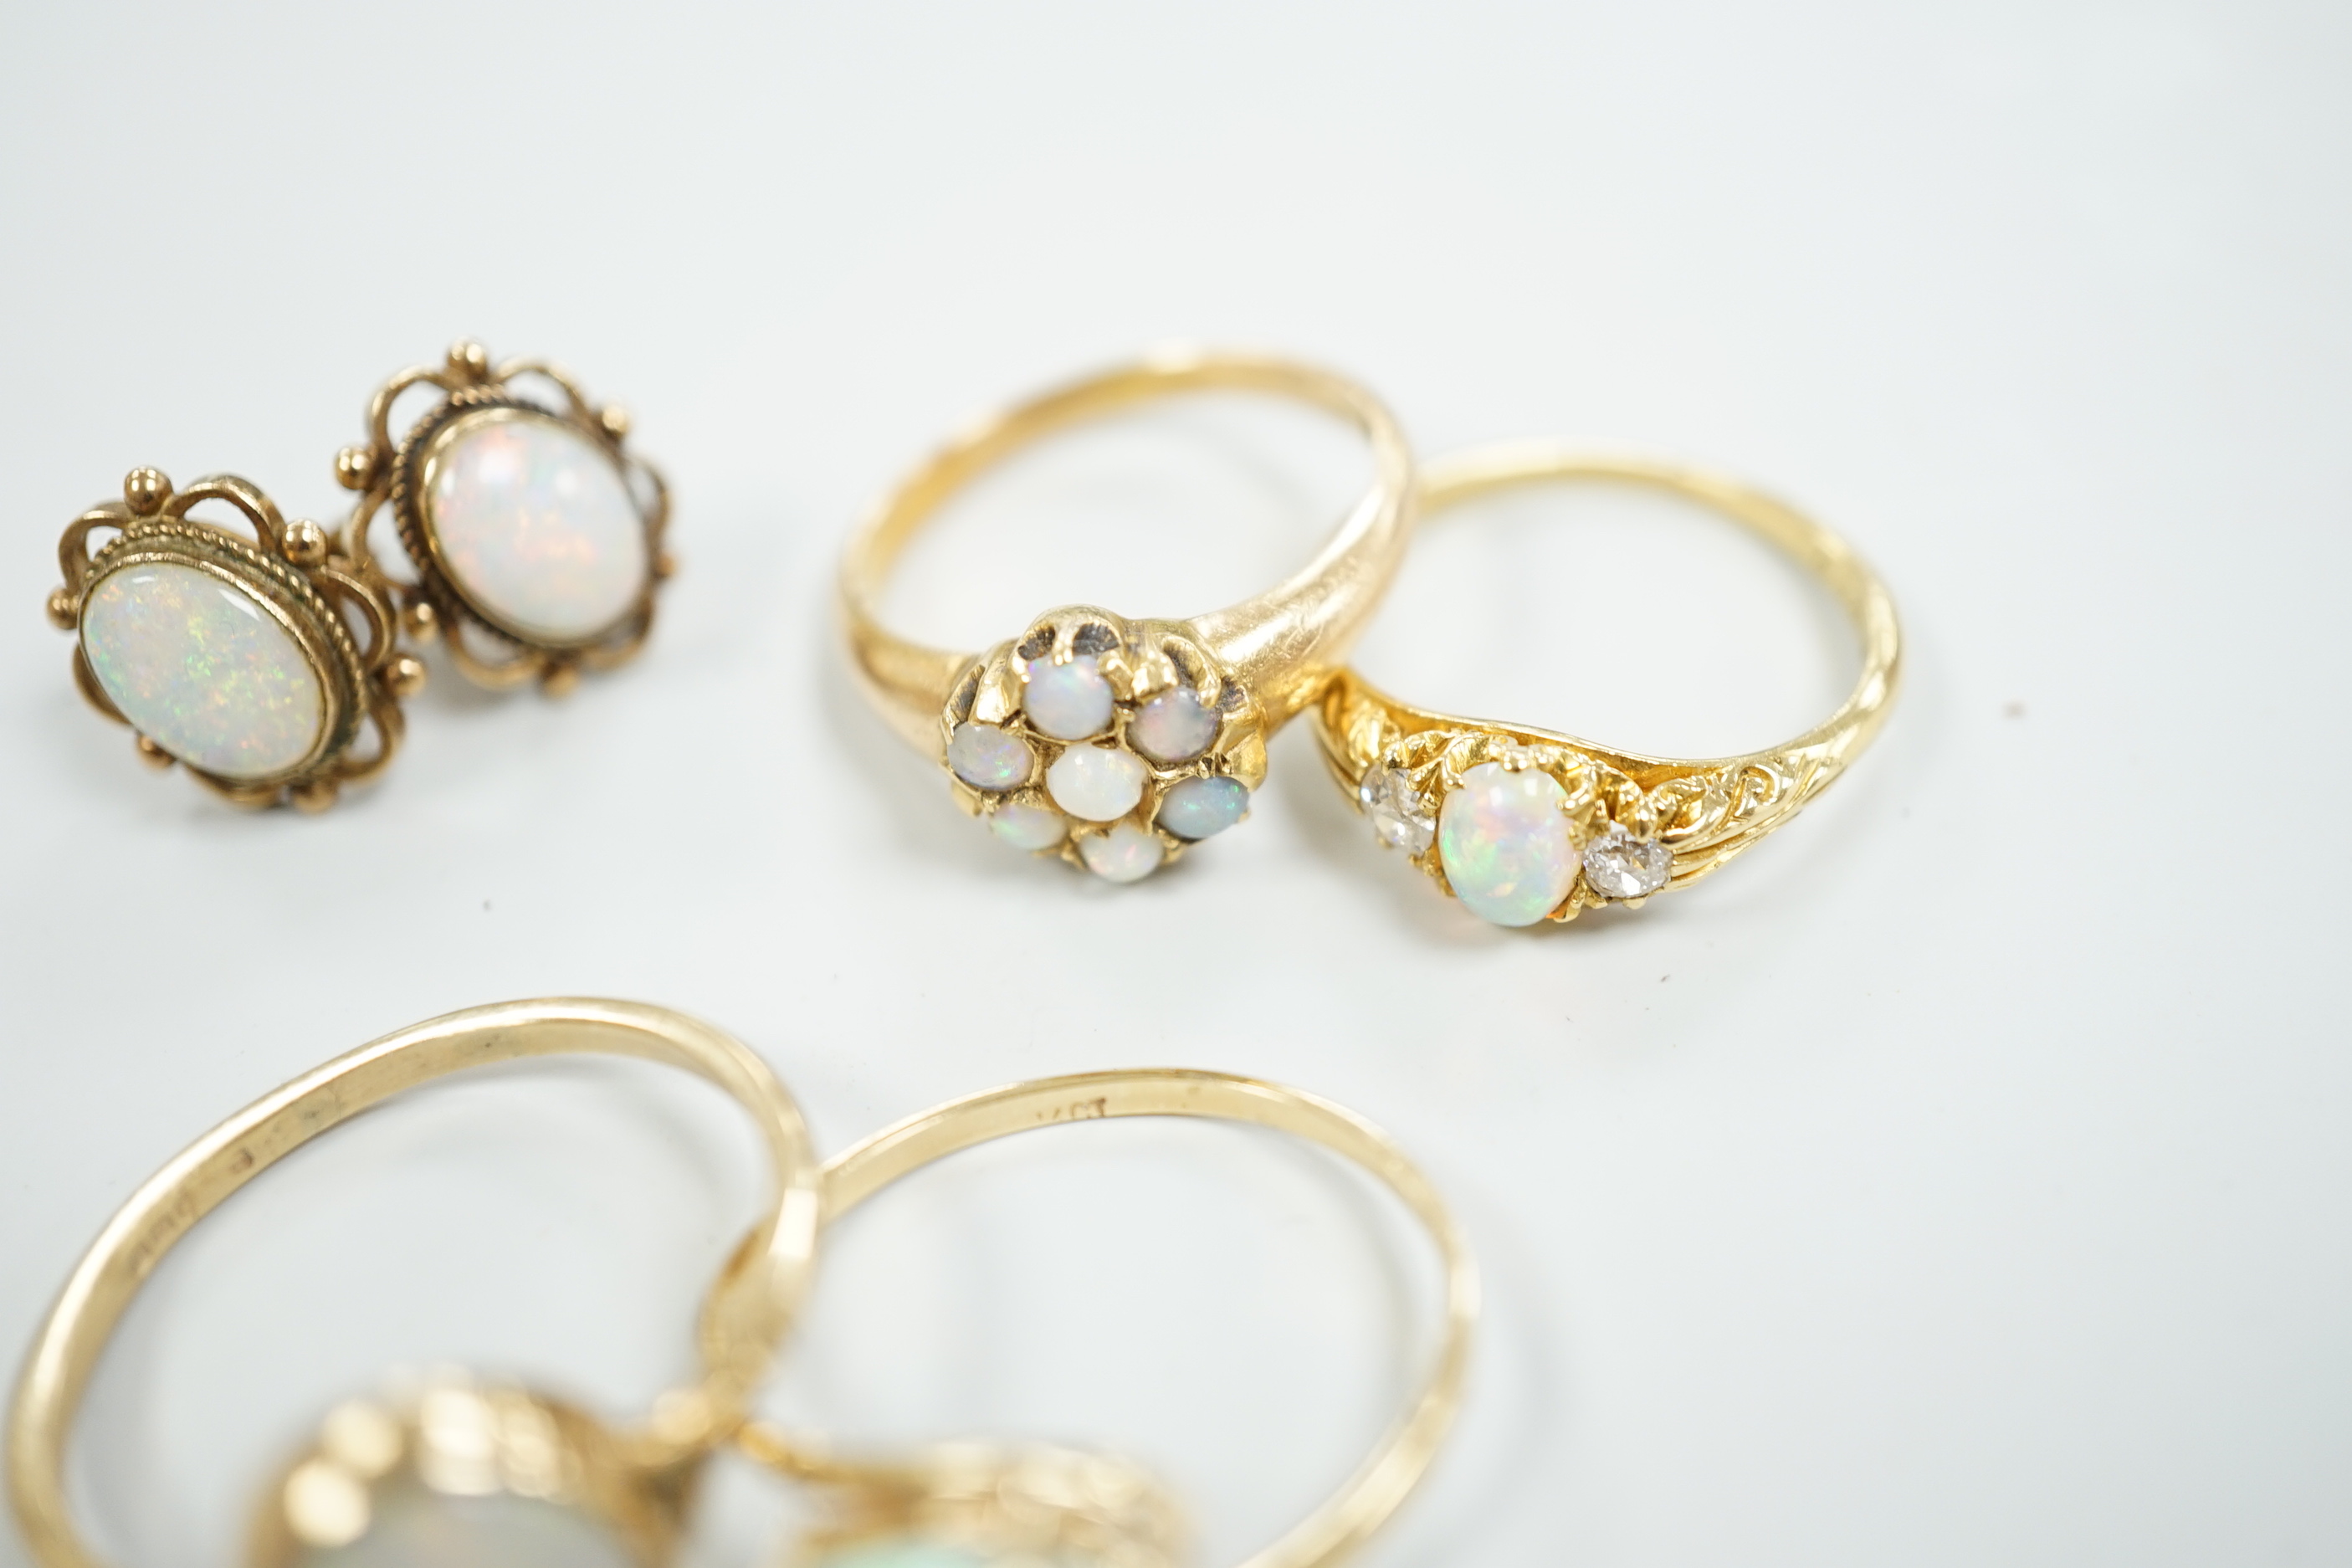 Two 18ct and white opal set rings, one with diamonds, gross 6.2 grams, a 14ct and white opal ring, a 9ct gold and white opal ring and a pair of 9ct gold and white opal earrings.